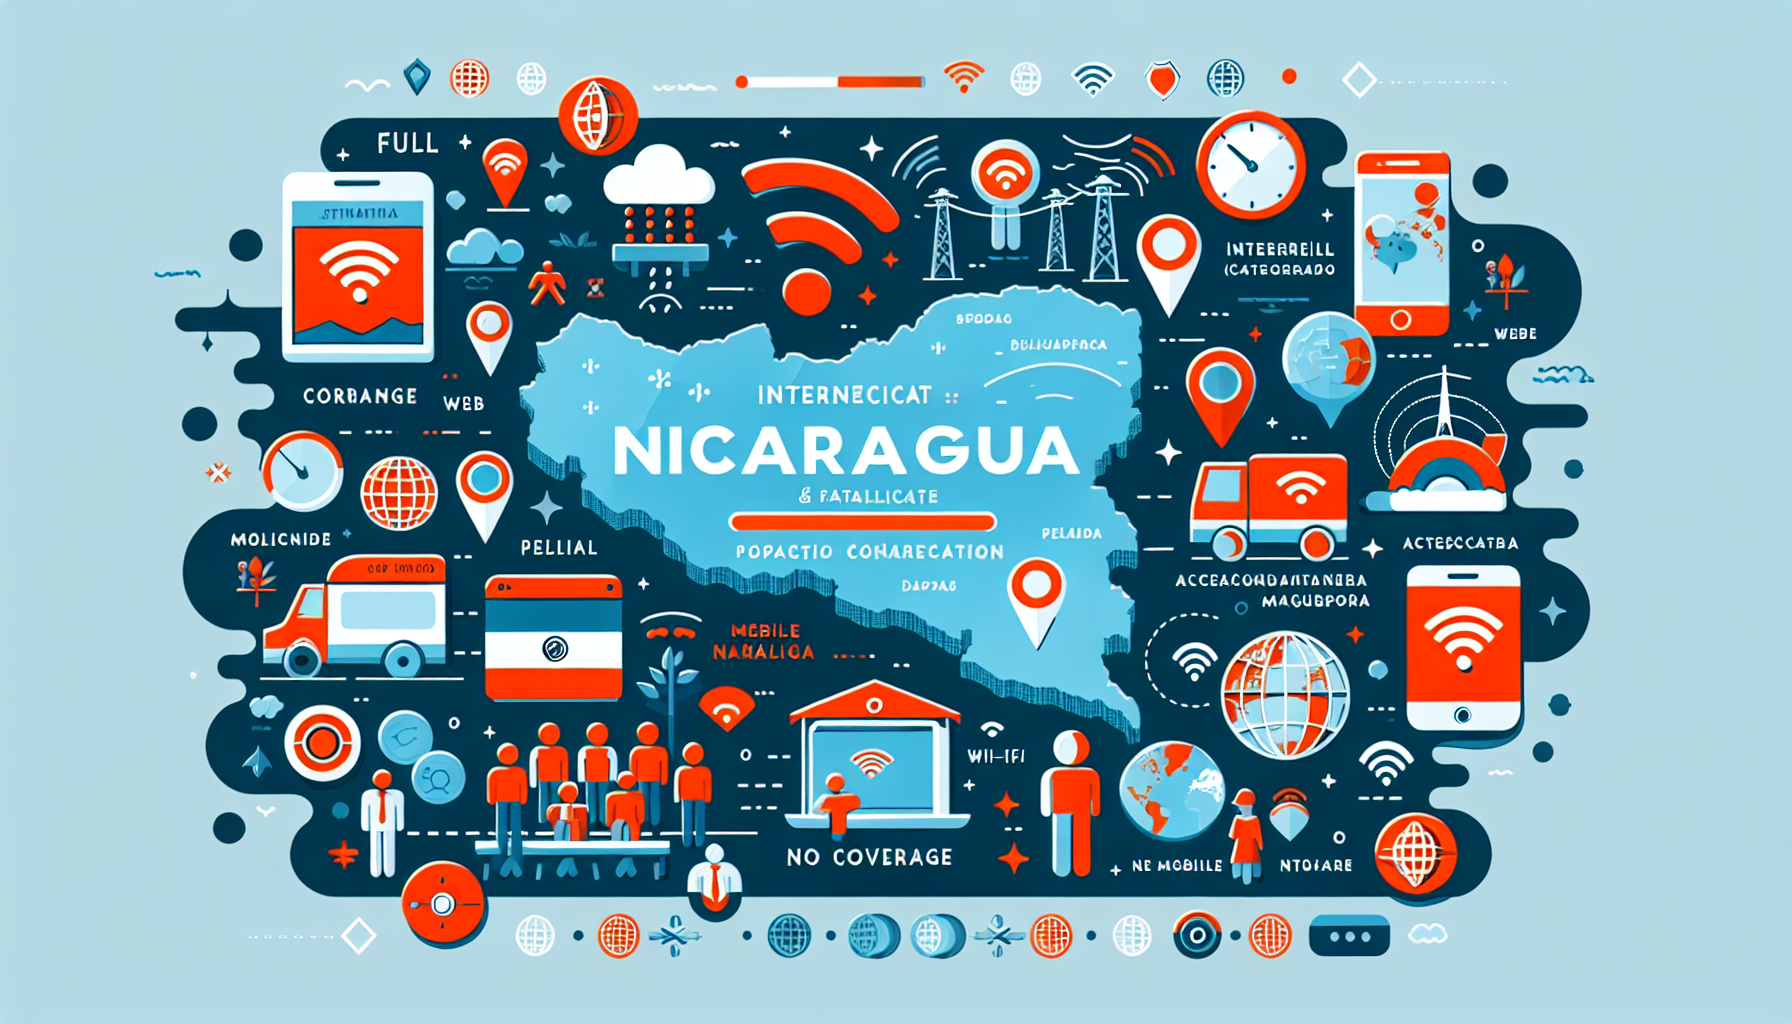 How Is The Internet And Mobile Network Coverage In Nicaragua?